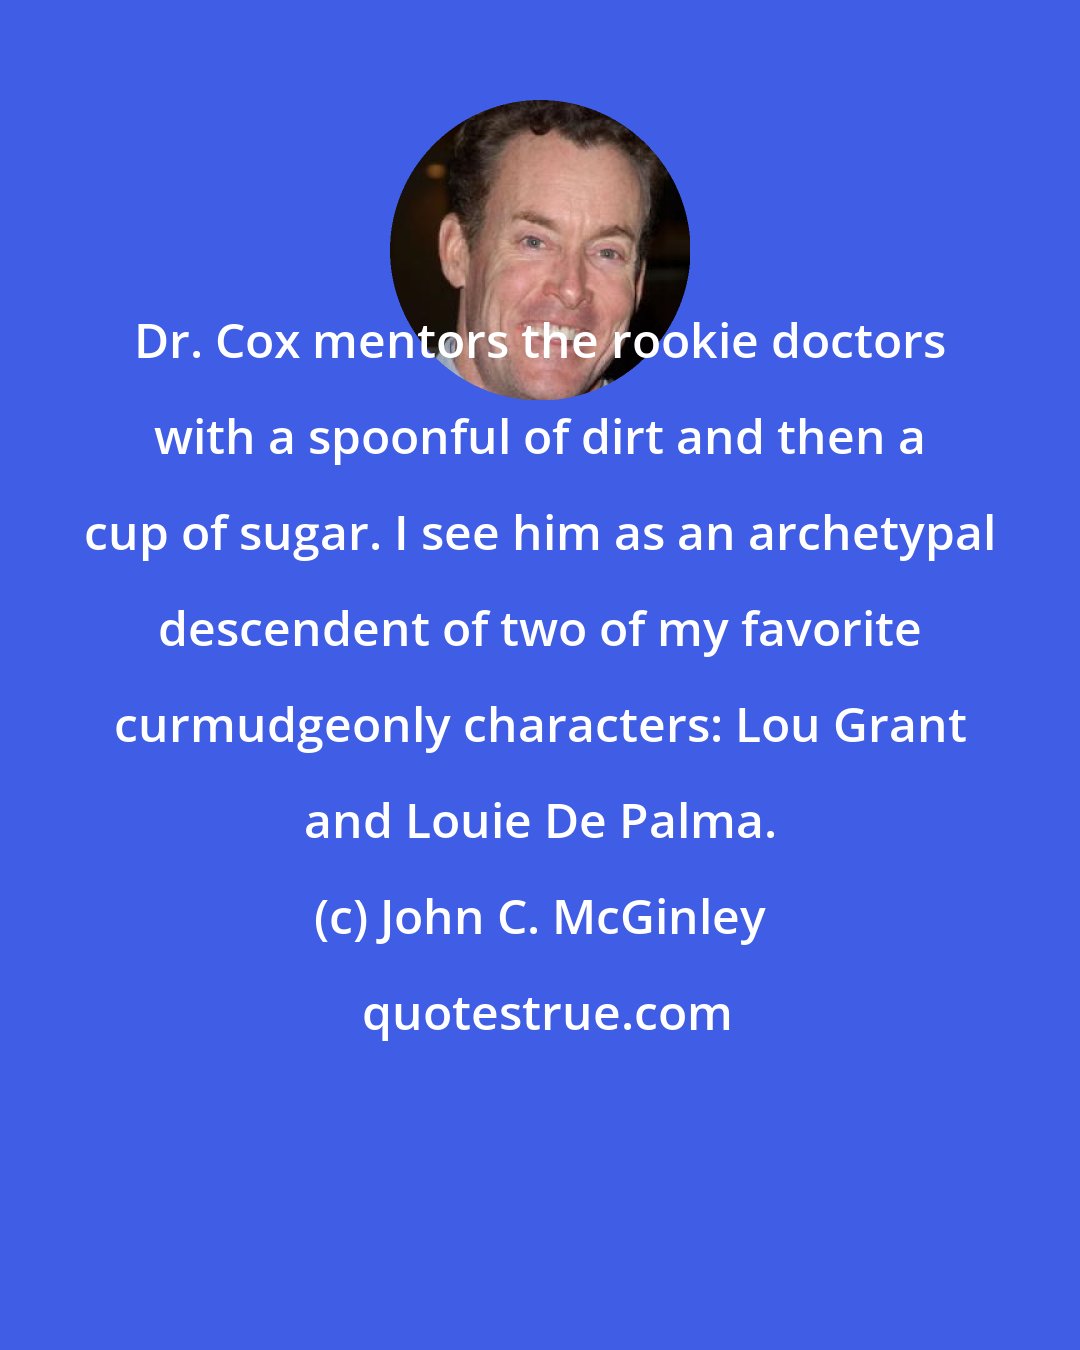 John C. McGinley: Dr. Cox mentors the rookie doctors with a spoonful of dirt and then a cup of sugar. I see him as an archetypal descendent of two of my favorite curmudgeonly characters: Lou Grant and Louie De Palma.